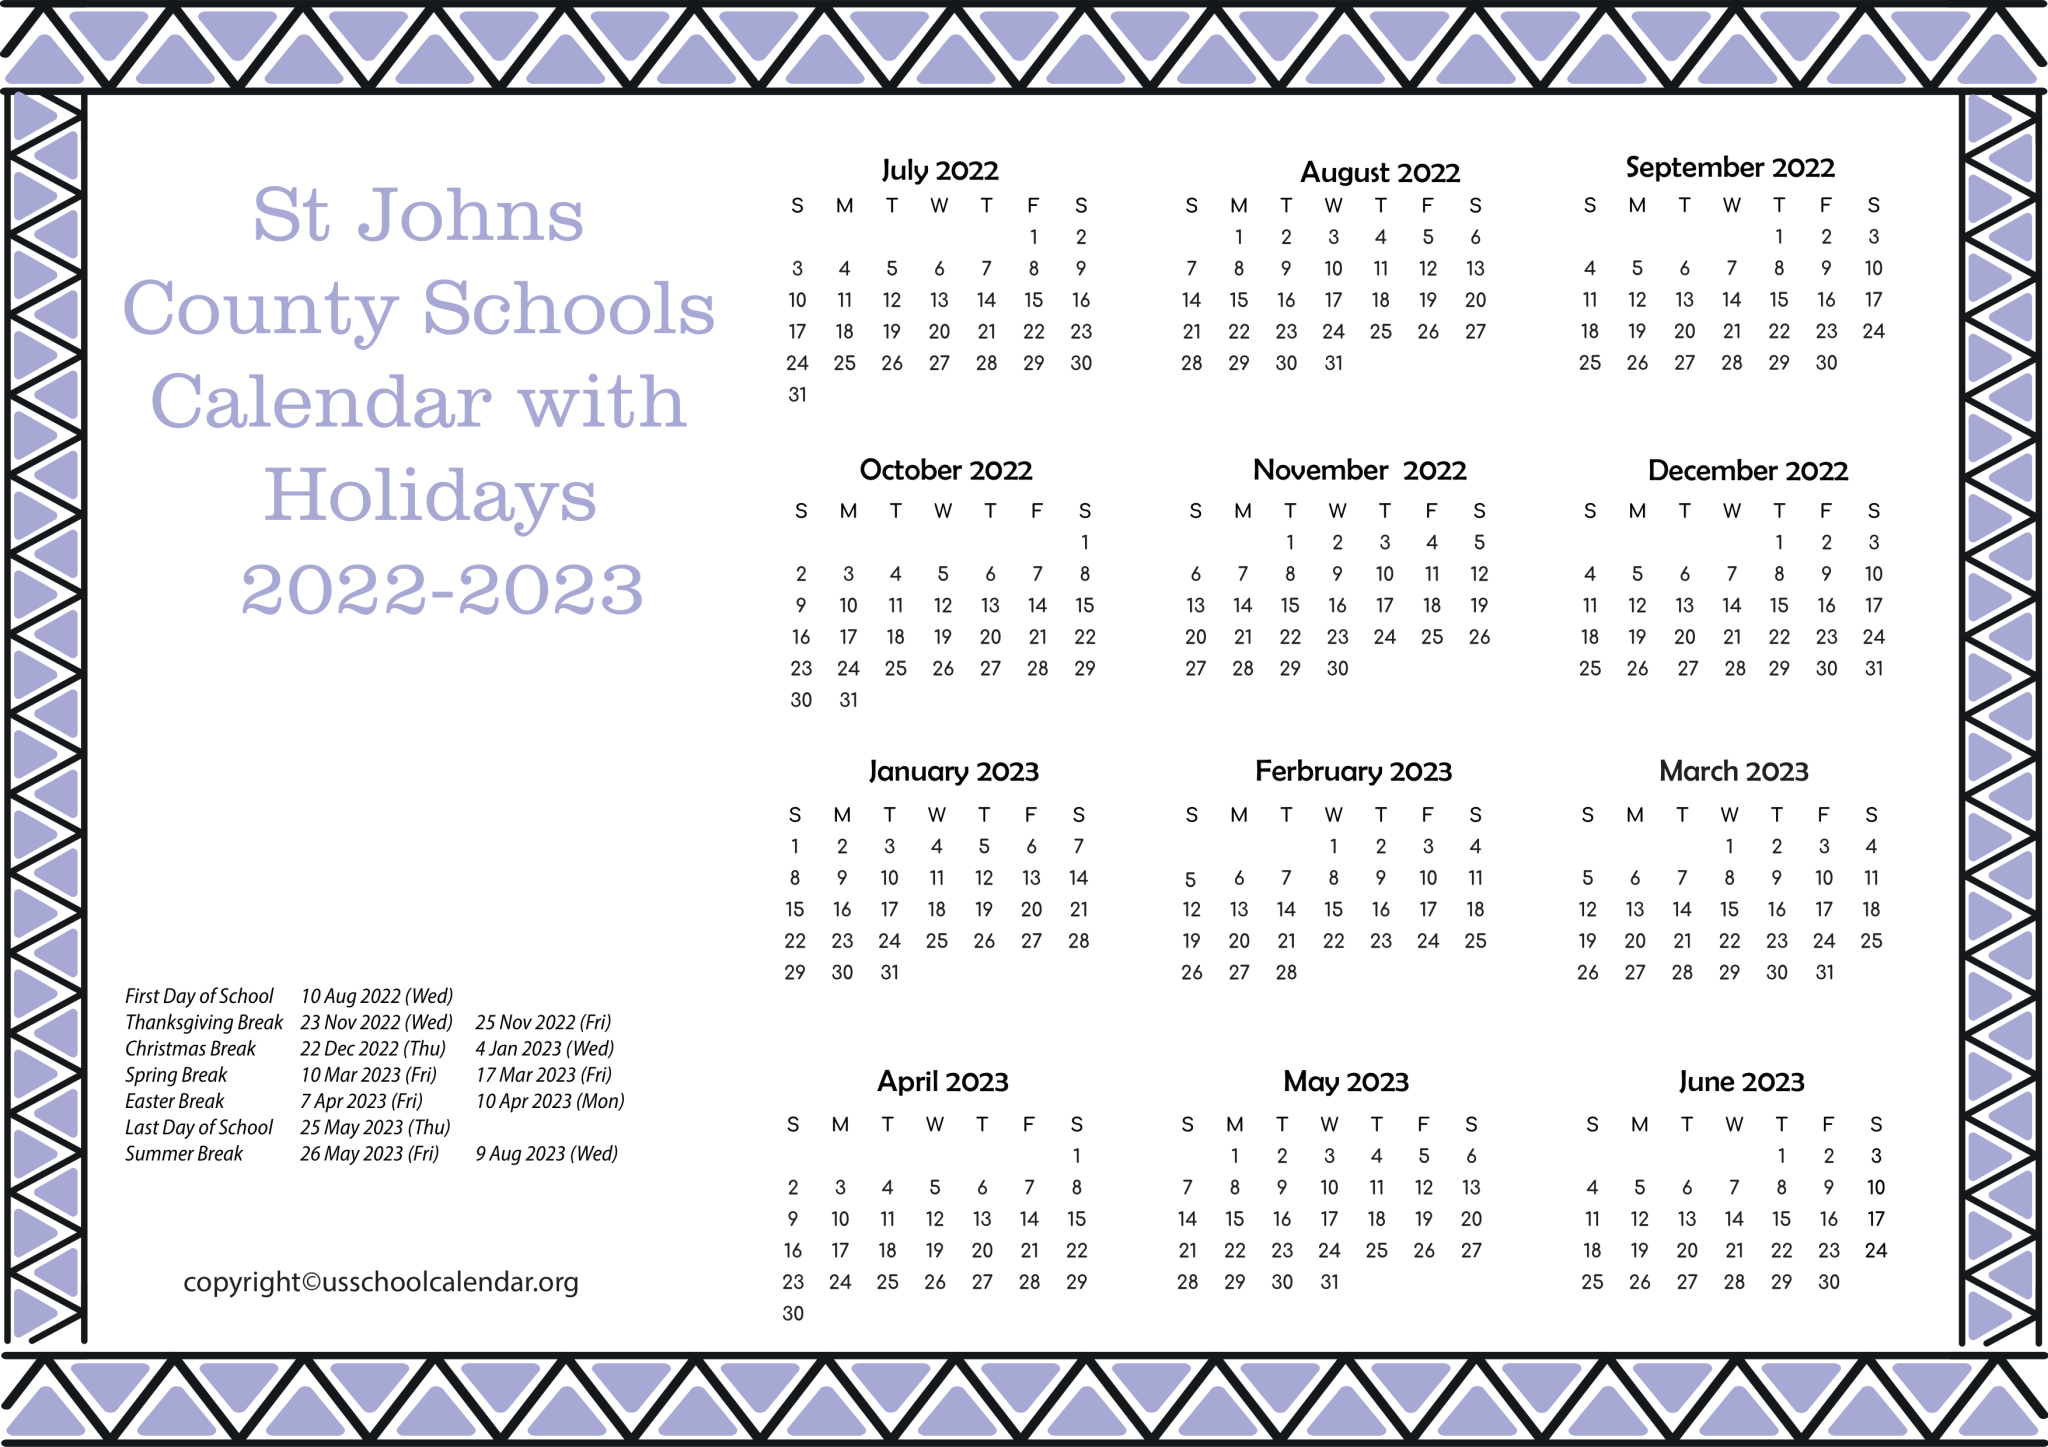 St Johns County Schools Calendar with Holidays 20222023